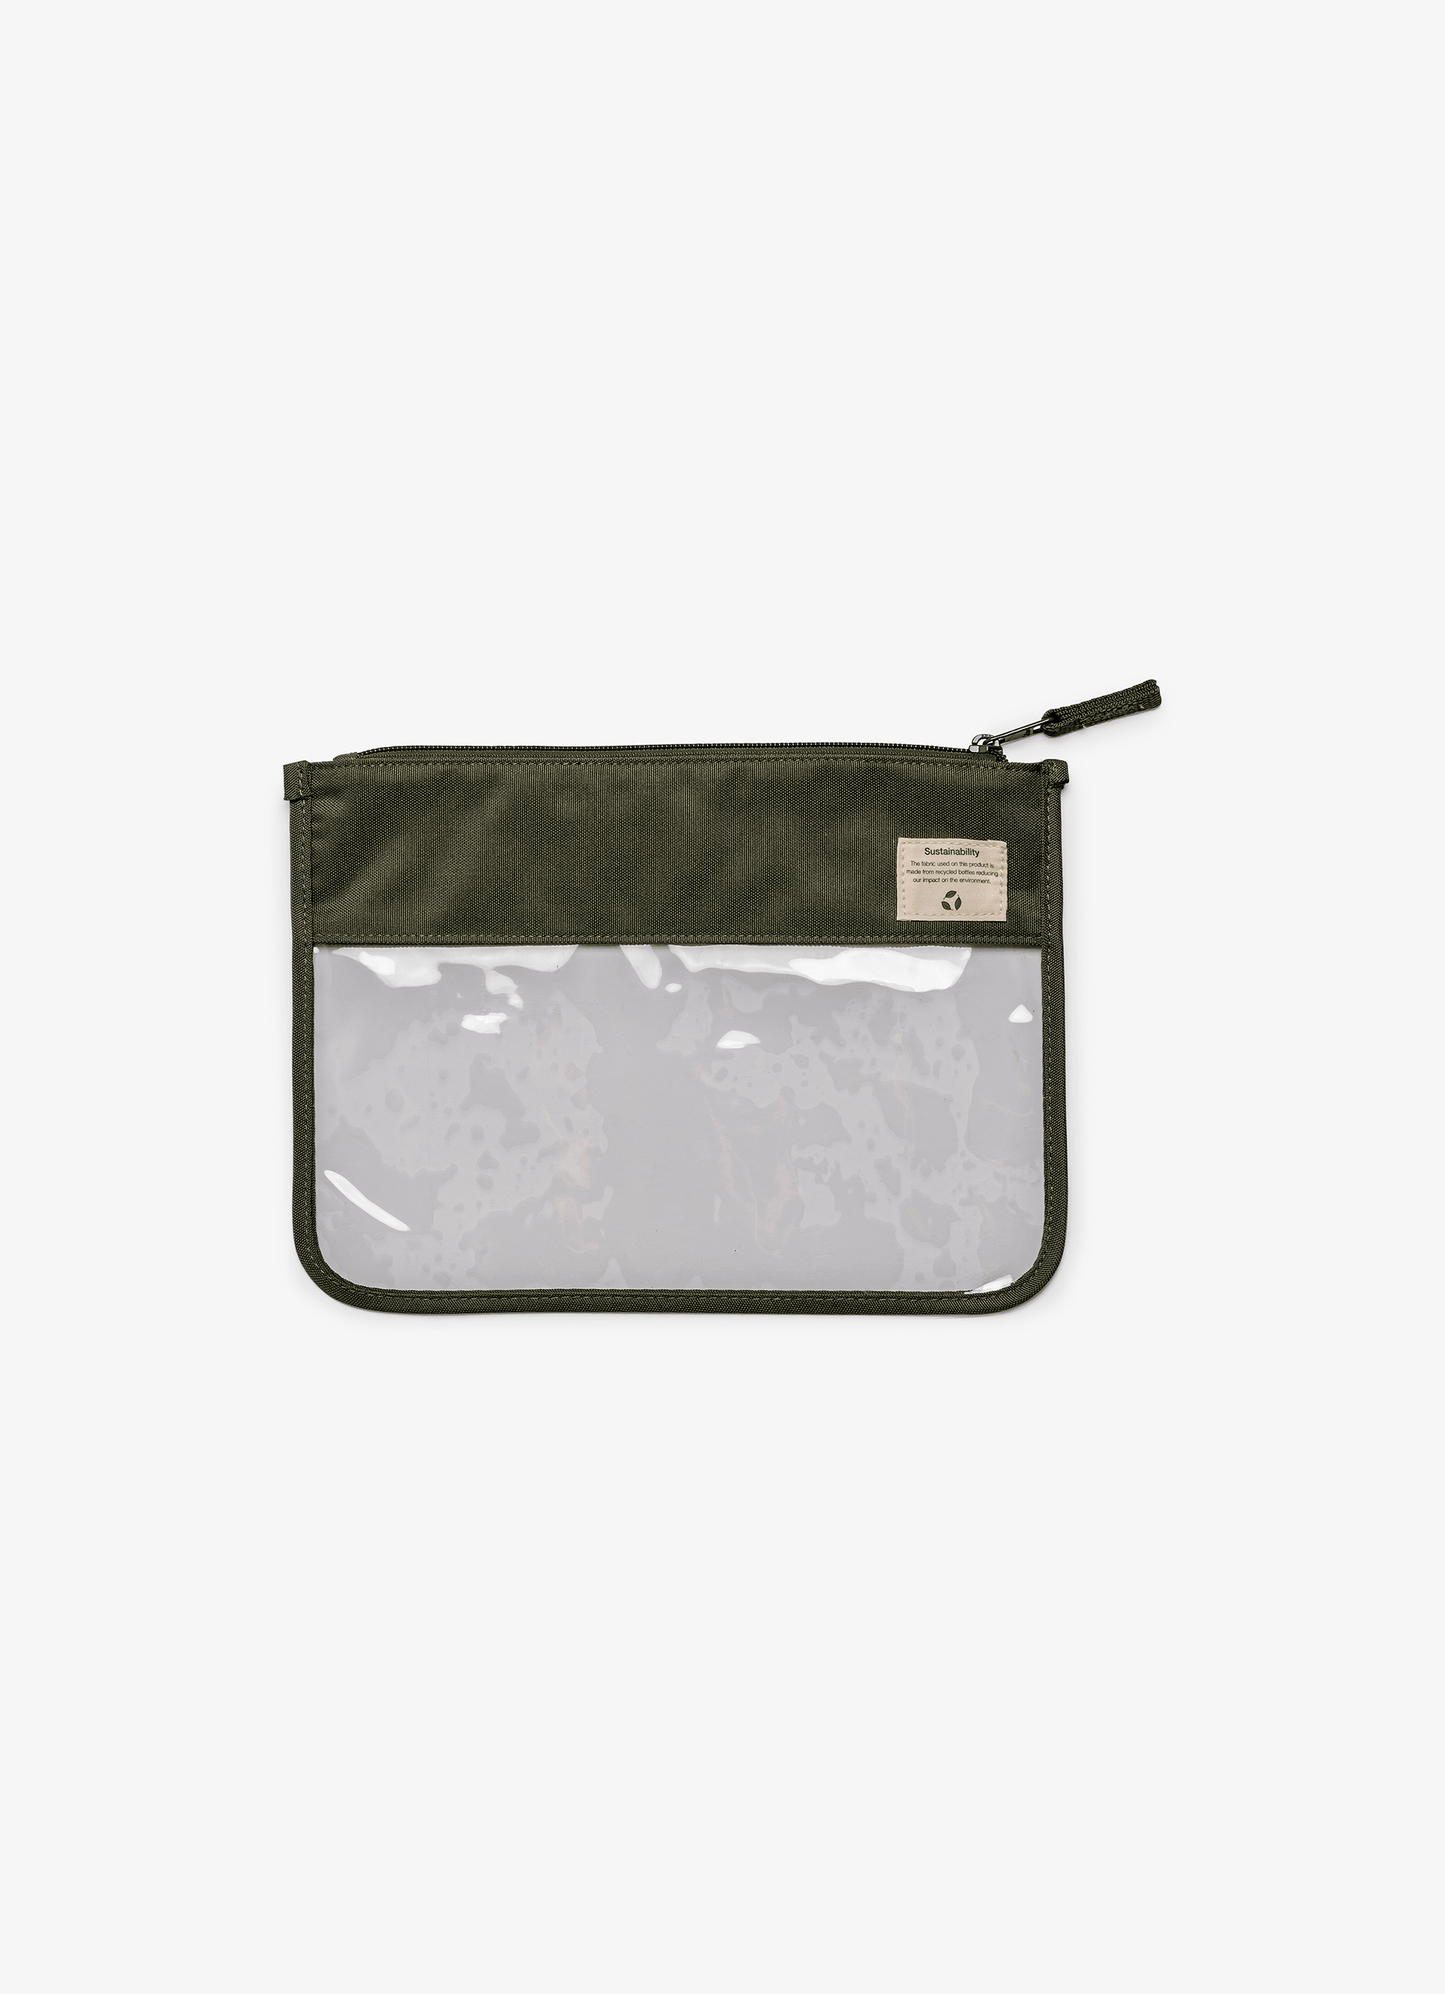 Clear Zipper Pouch - Large - Green